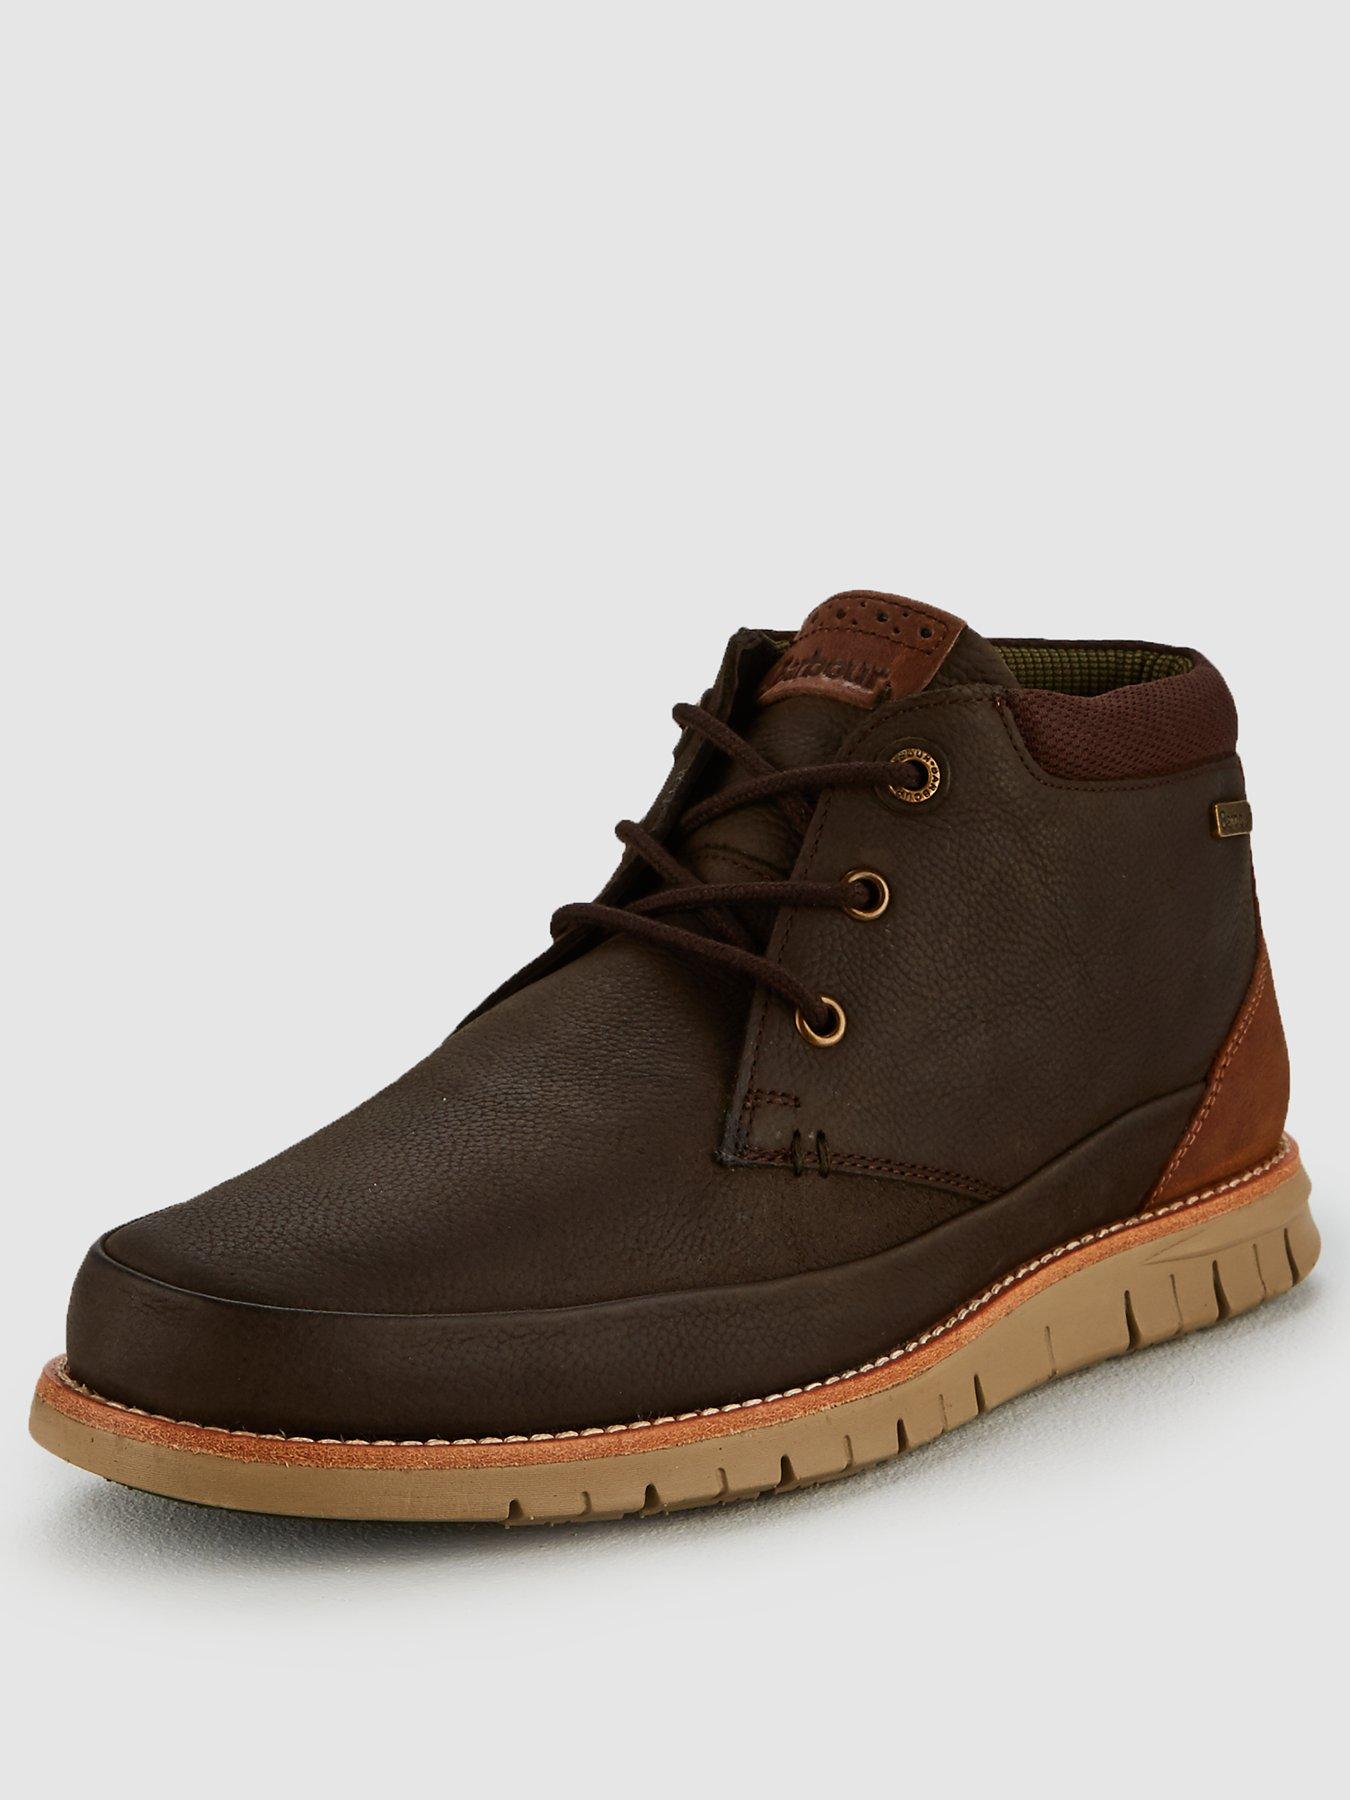 barbour boots brown